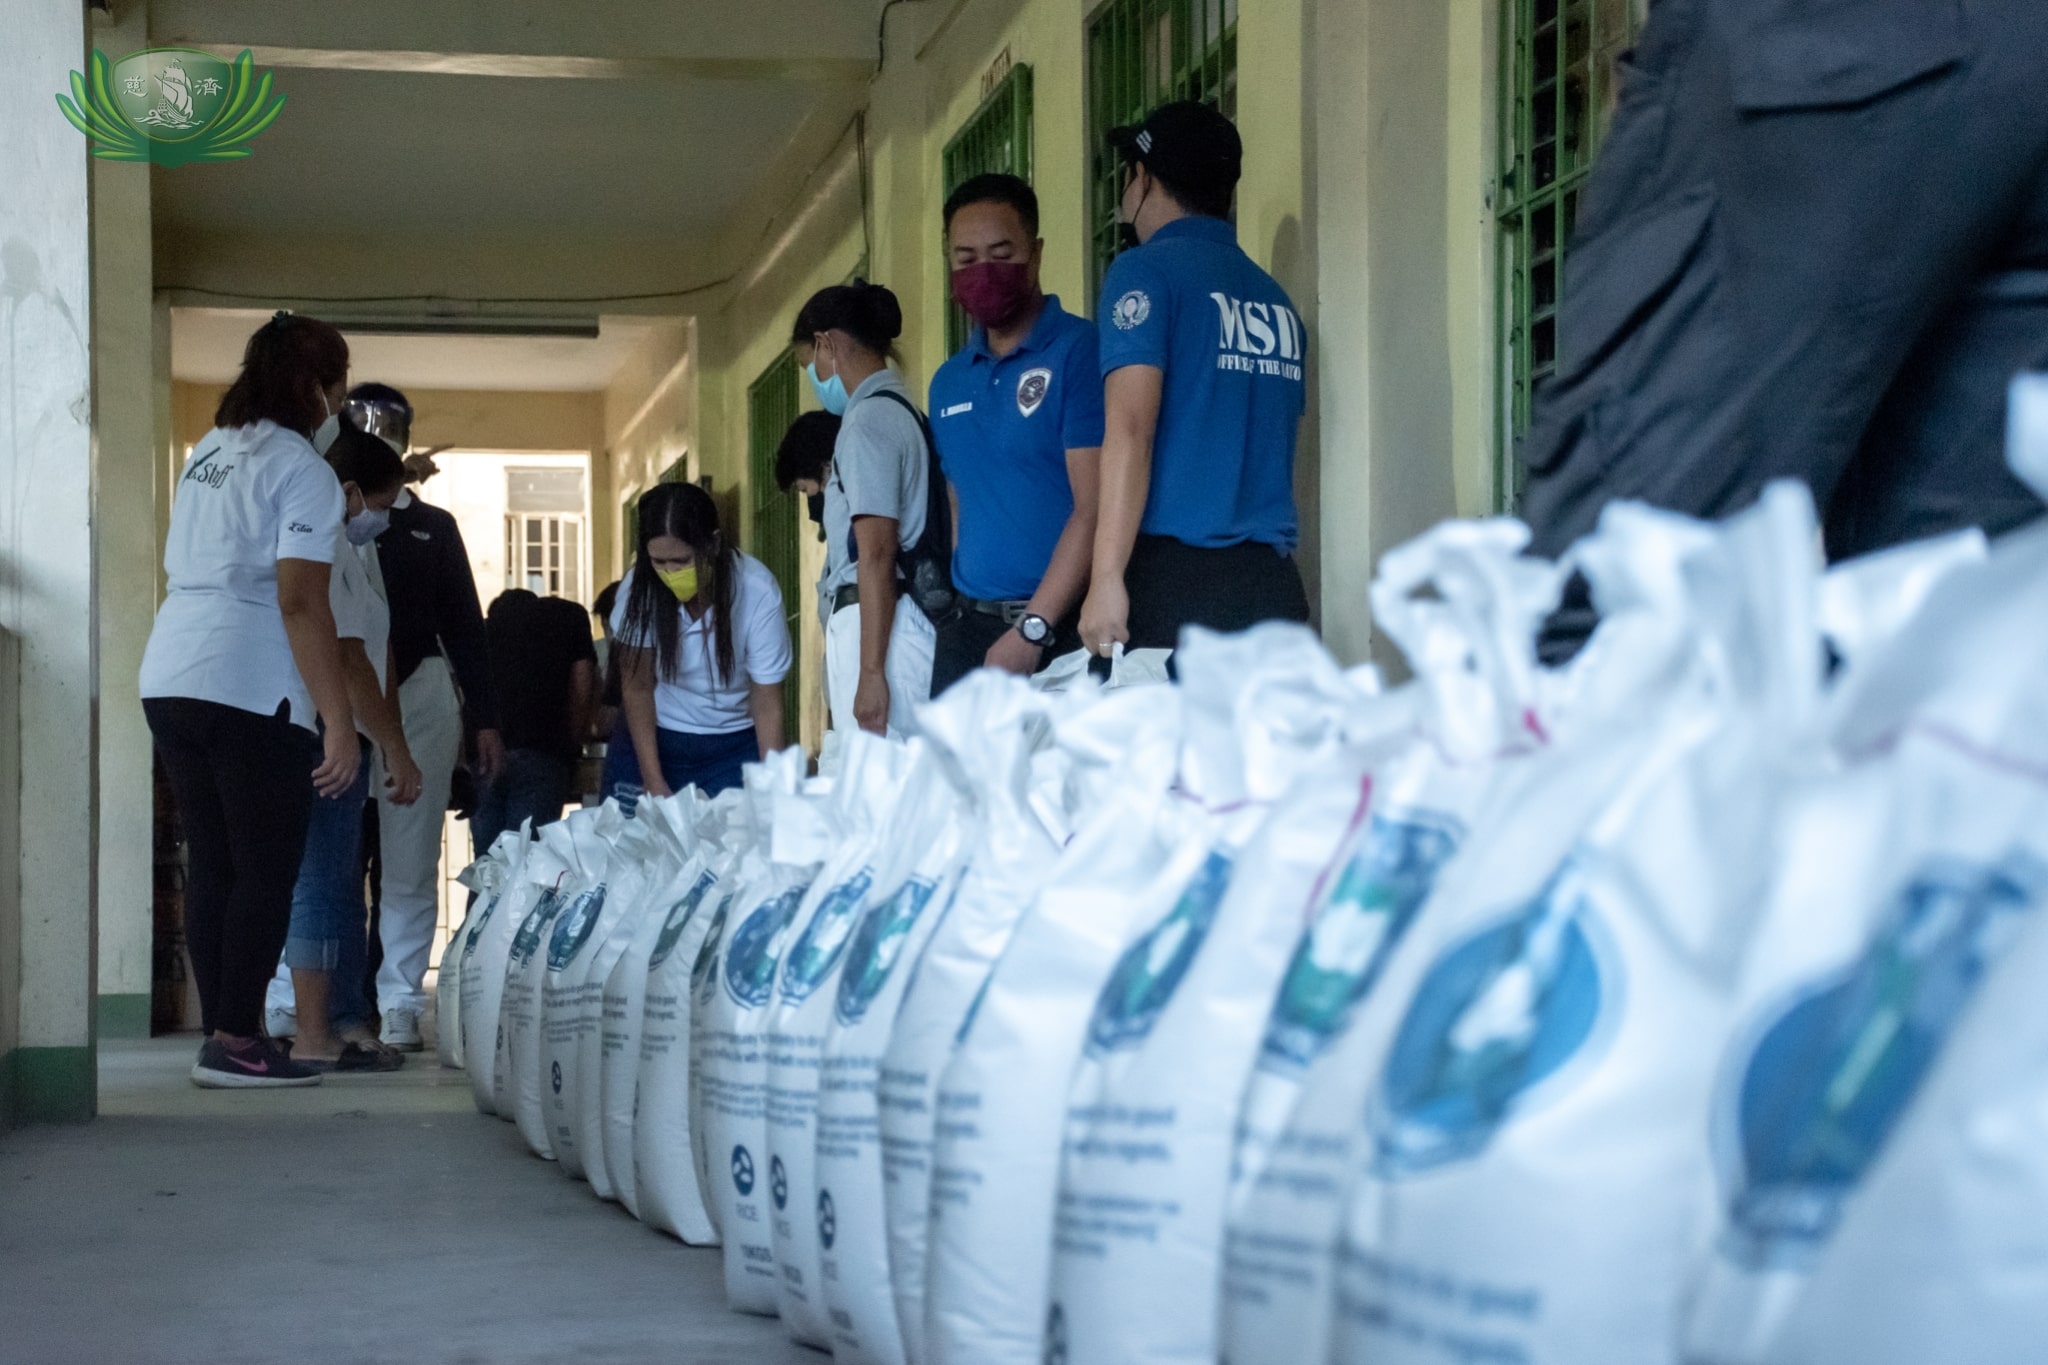 Sacks of rice are lined up for beneficiaries to claim. 